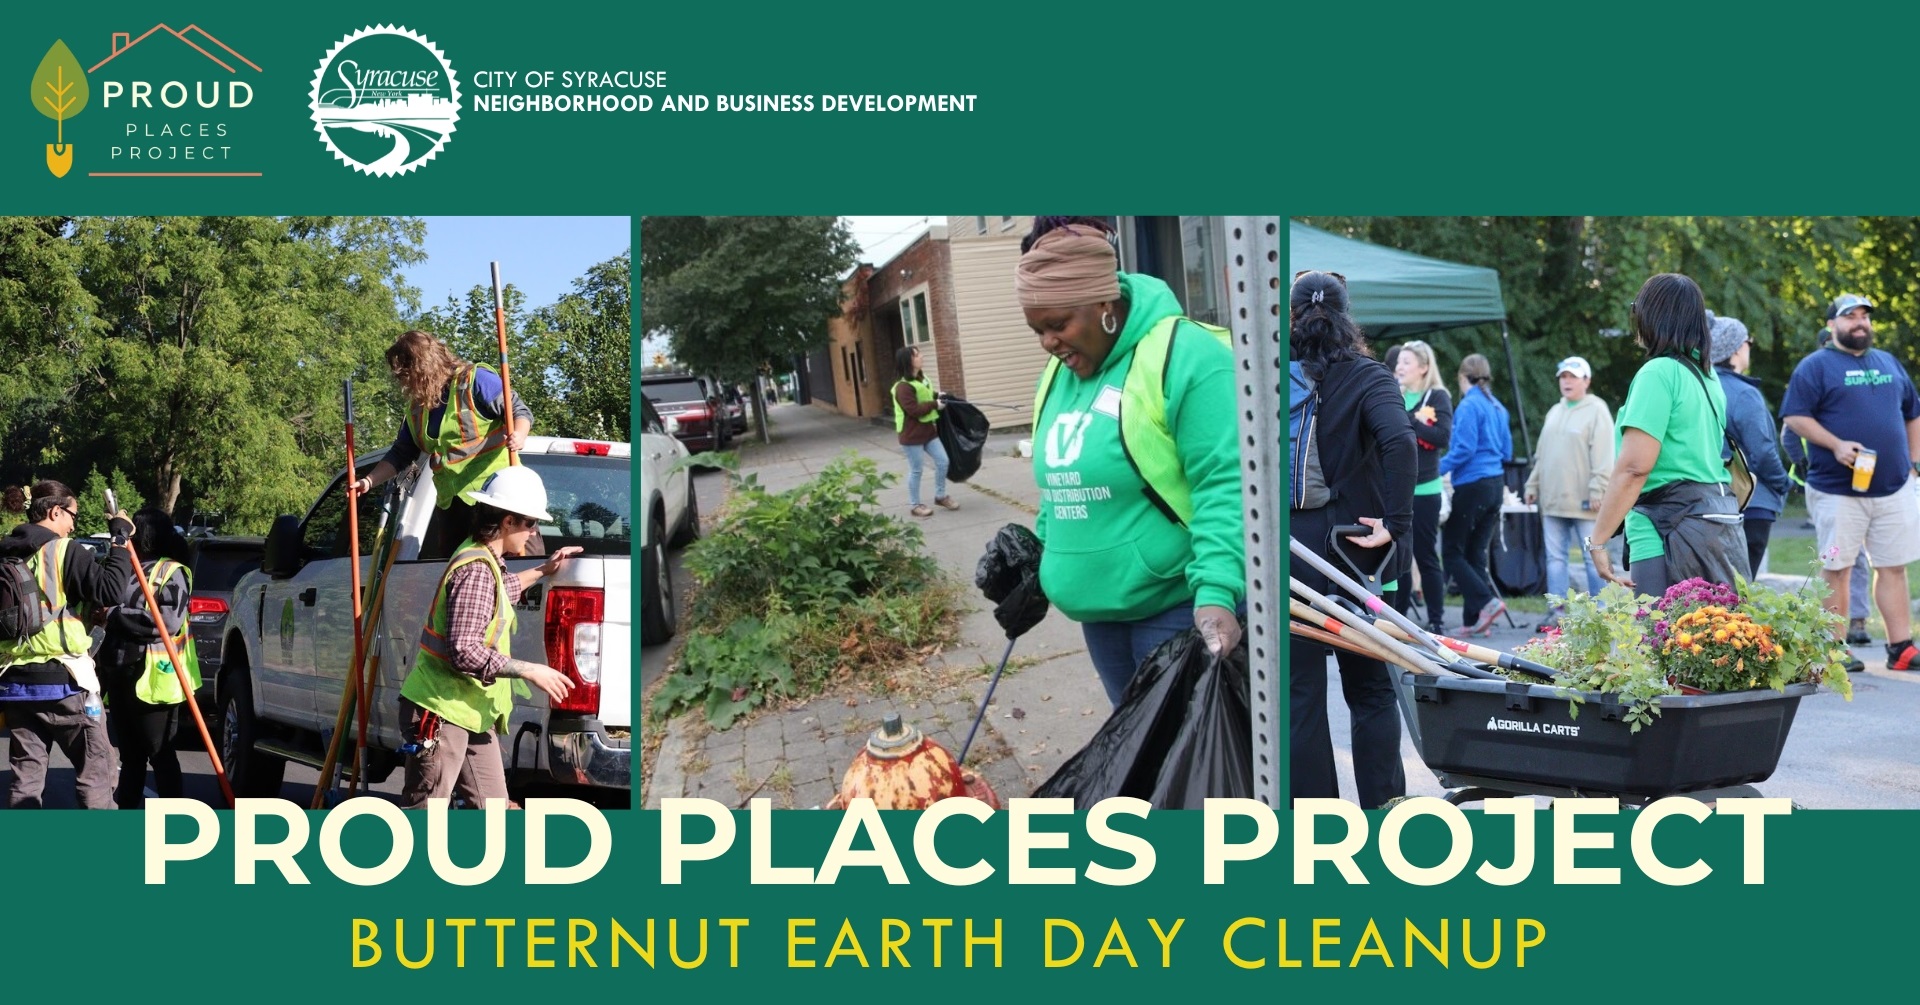 Butternut Earth Day Cleanup.jpg